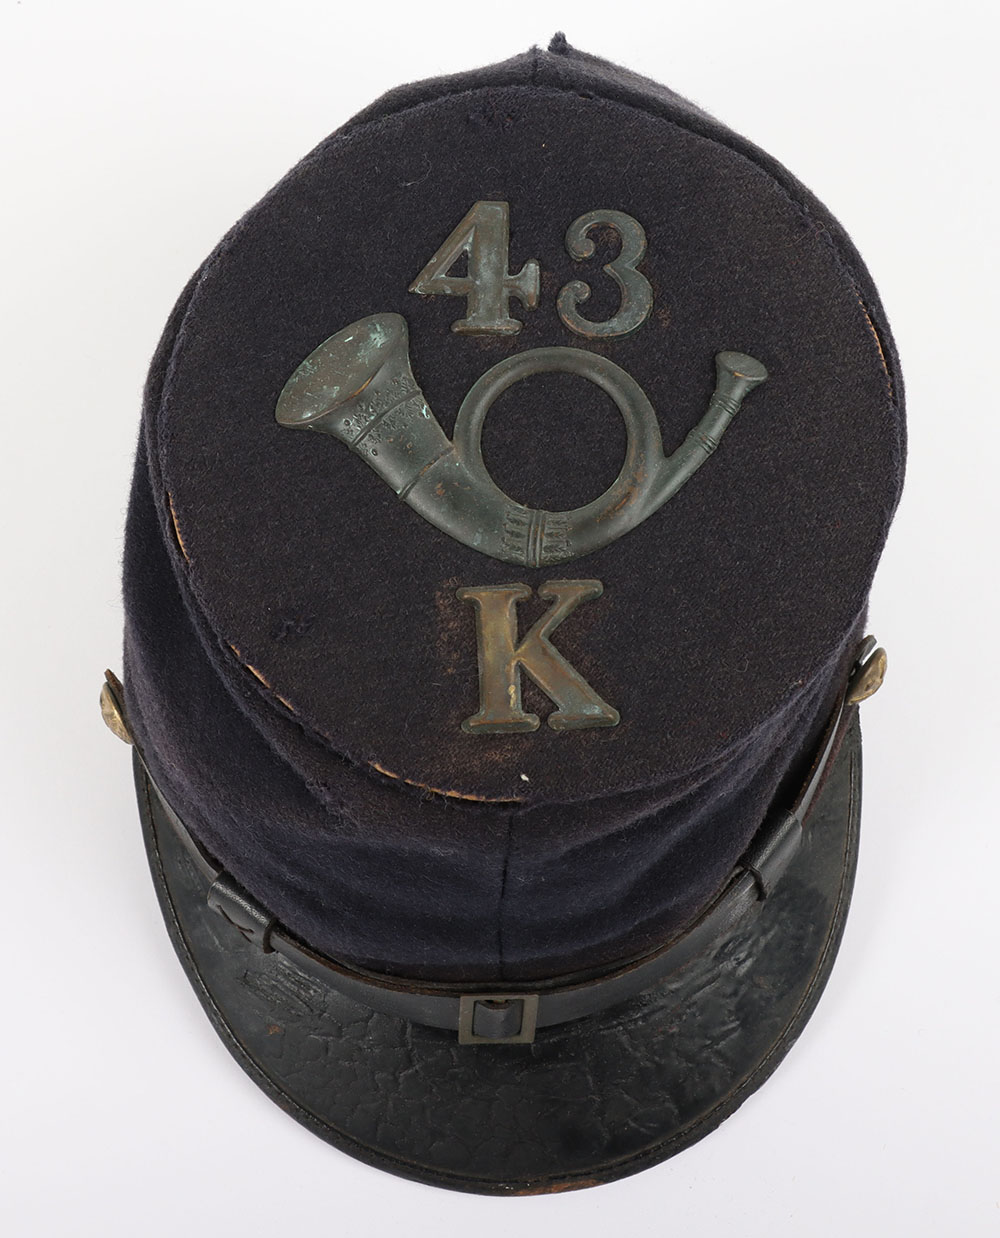 US CIVIL WAR PERIOD UNION INFANTRY FORAGE CAP W/ VERBAL ID & MUSTER ROLL, this belonged to Private G - Image 13 of 15